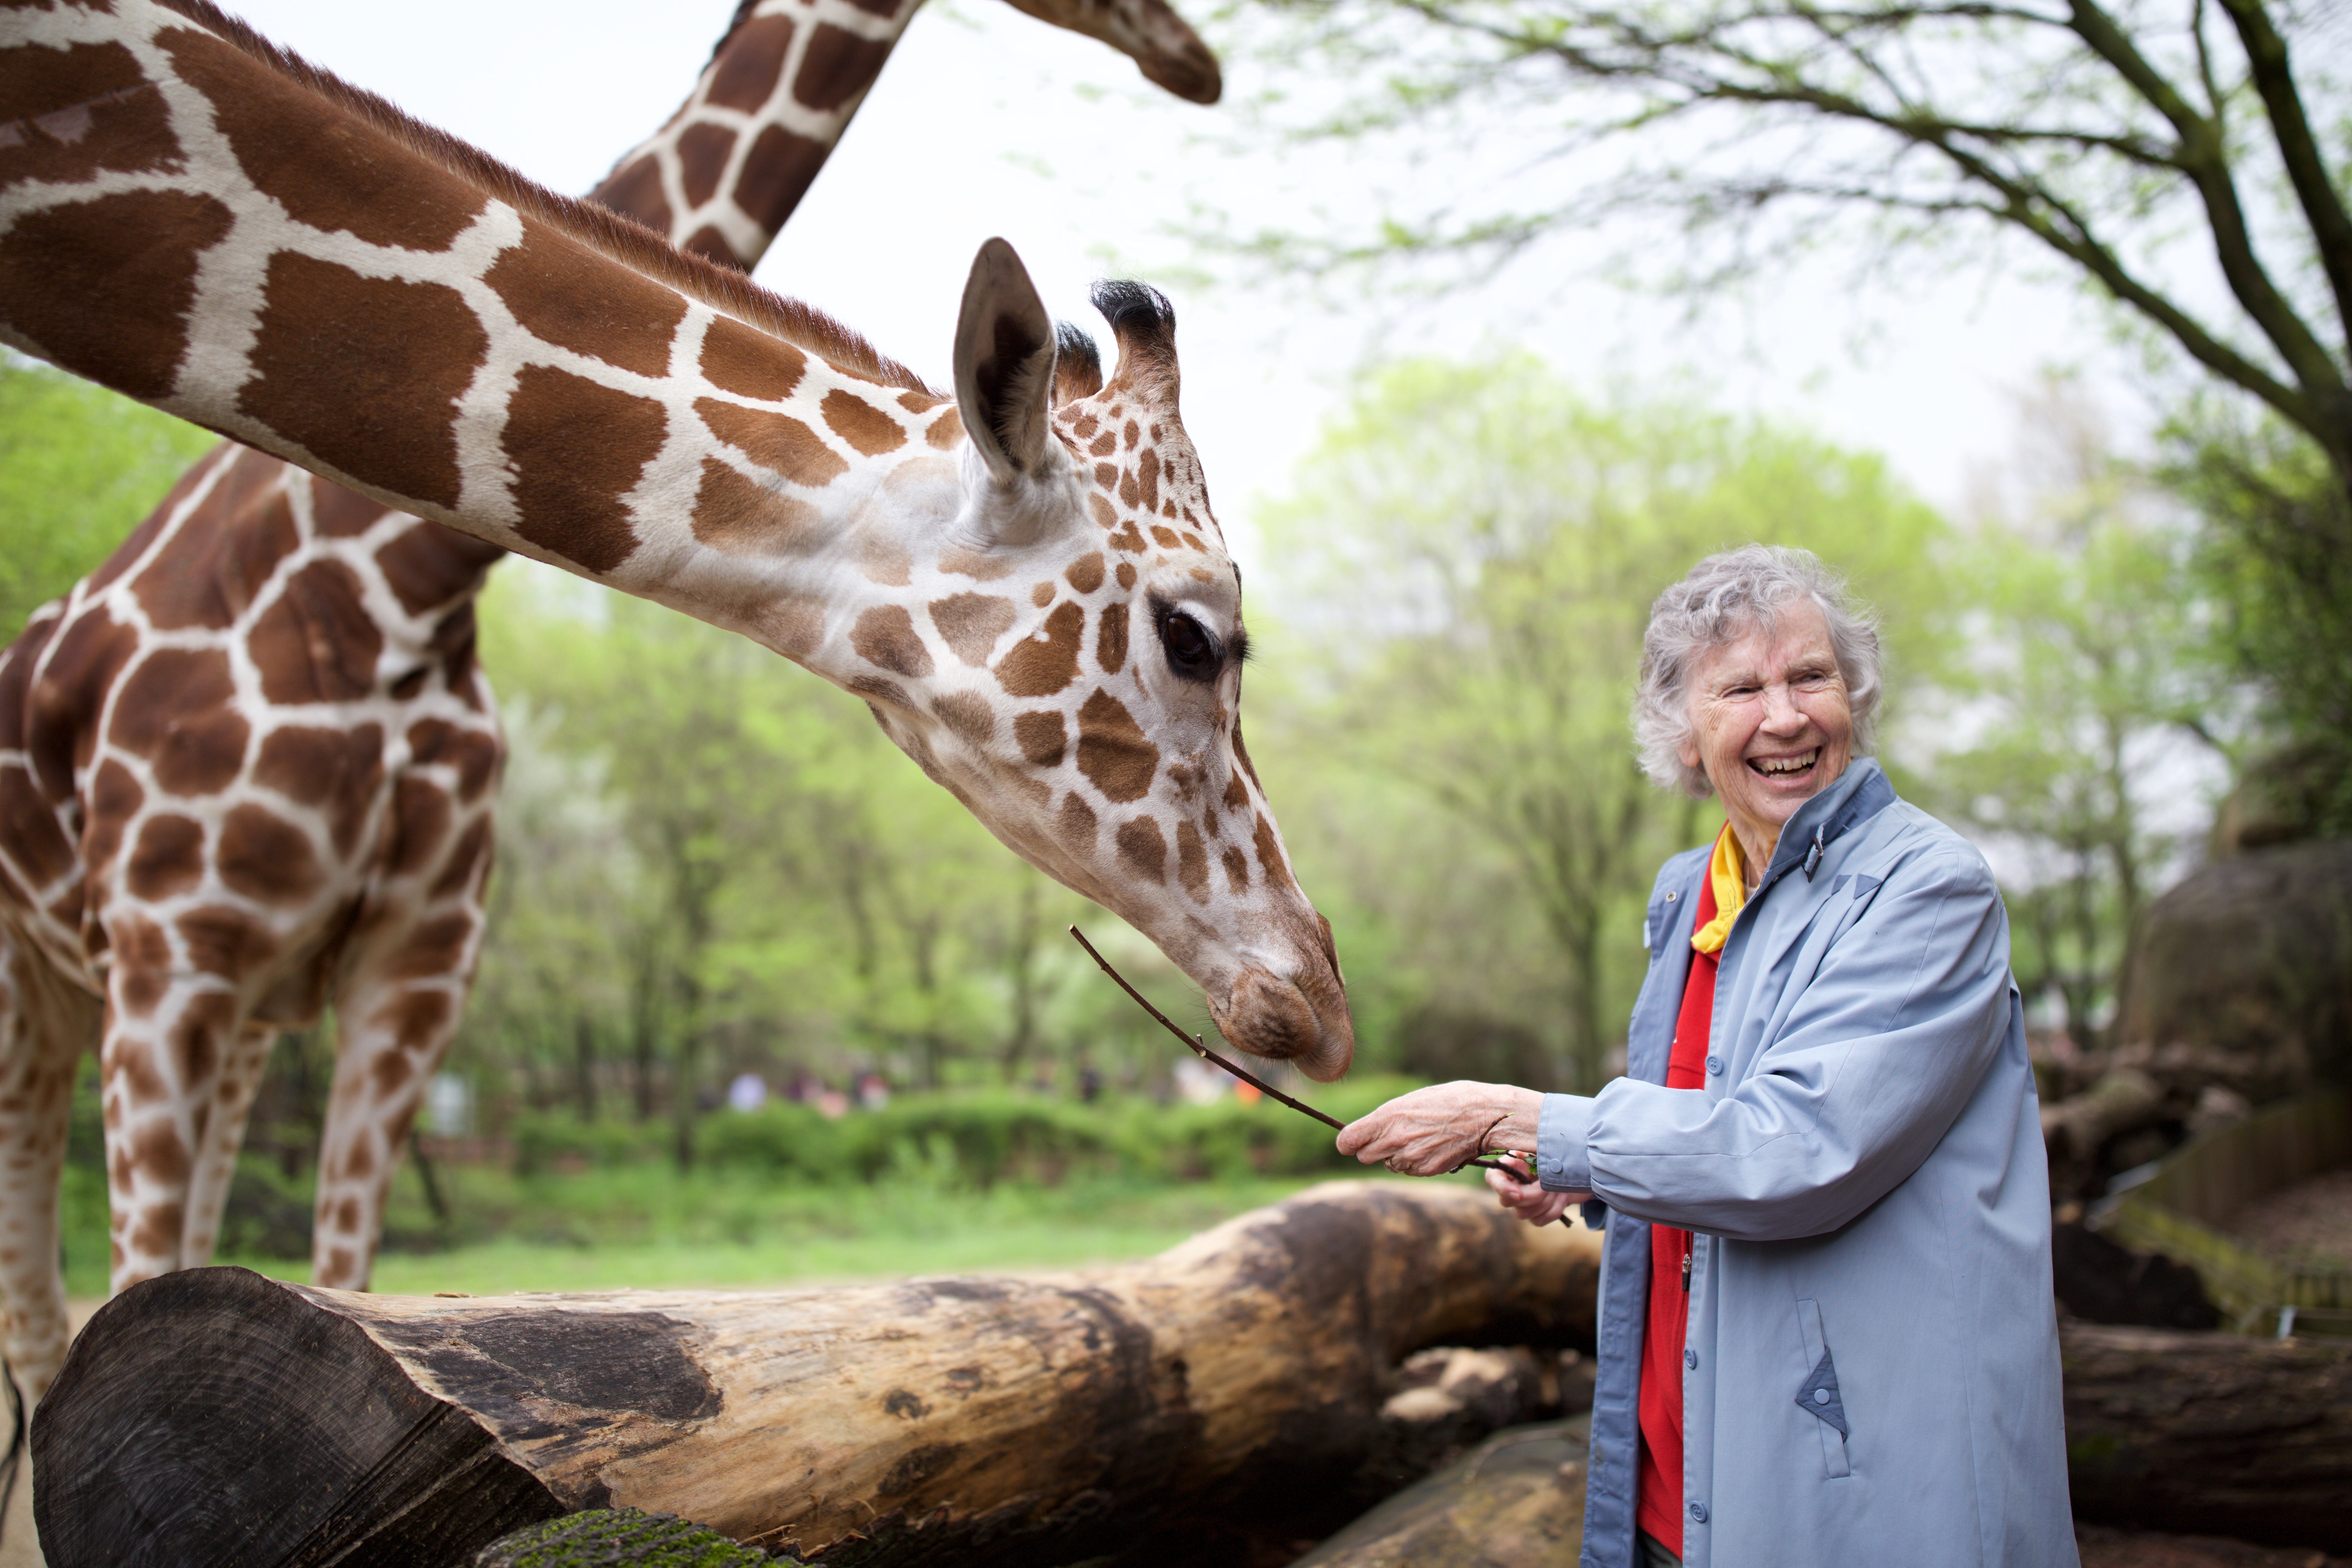 Woman Who Loves Giraffes' brings zoologist's vision to new generation